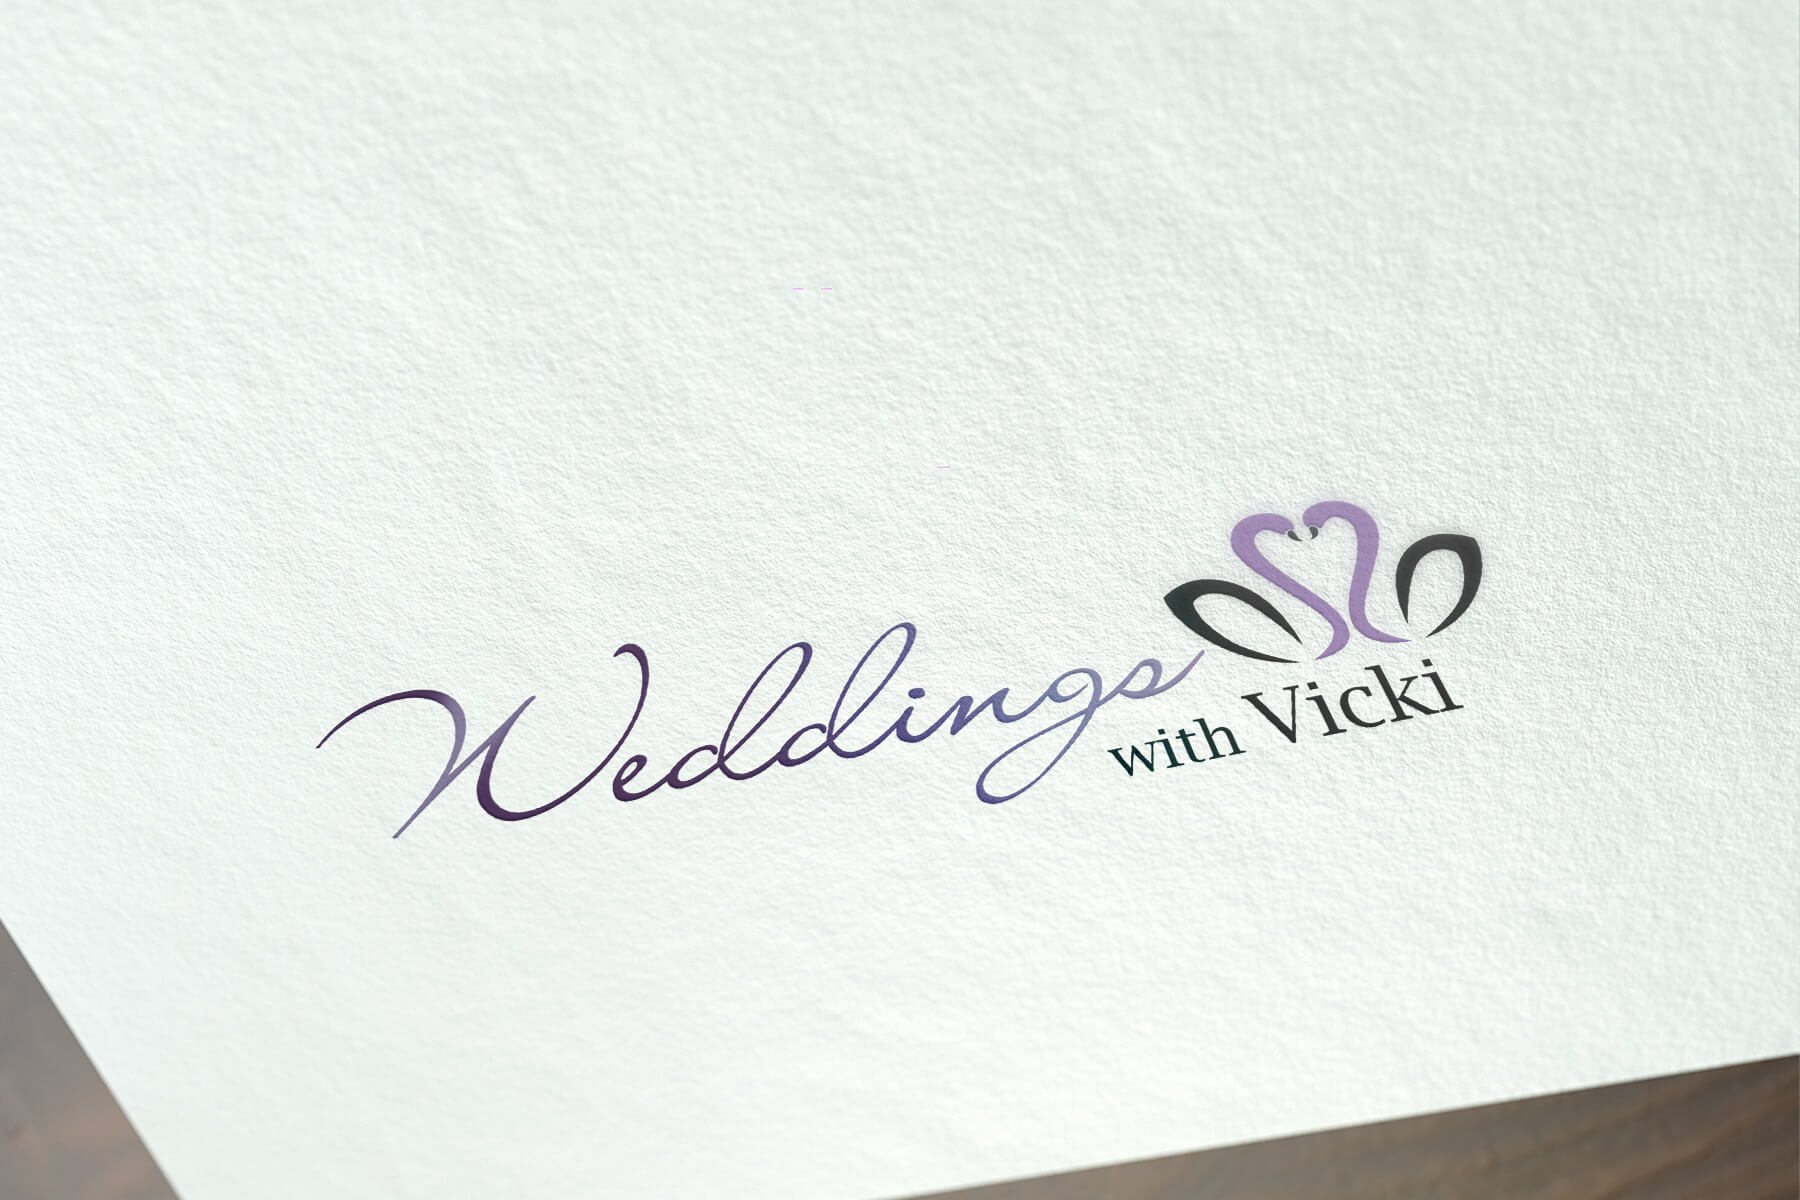 Weddings with Vicki - Designs by CR8VE designs Perth